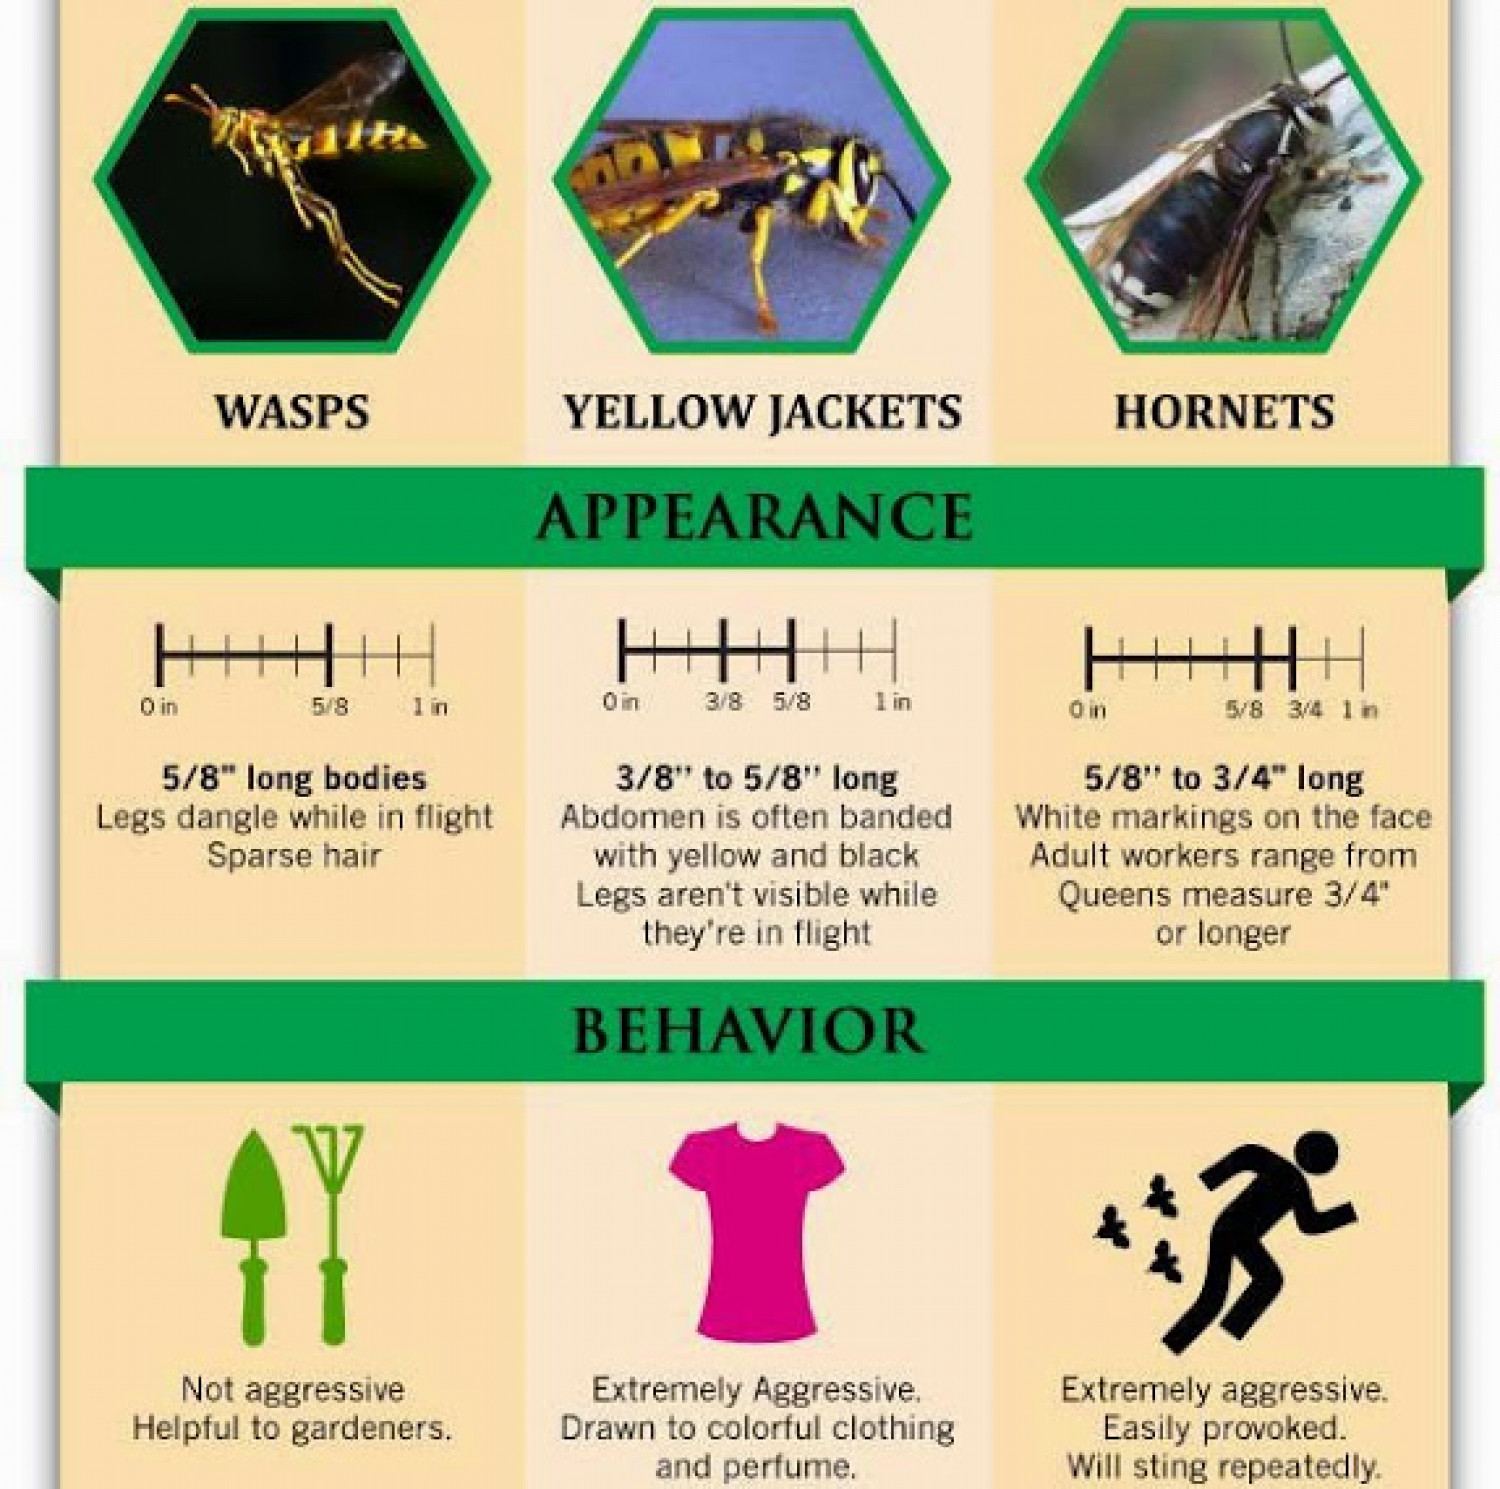 The Proper Way to Handle Wasps and Bees Infographic